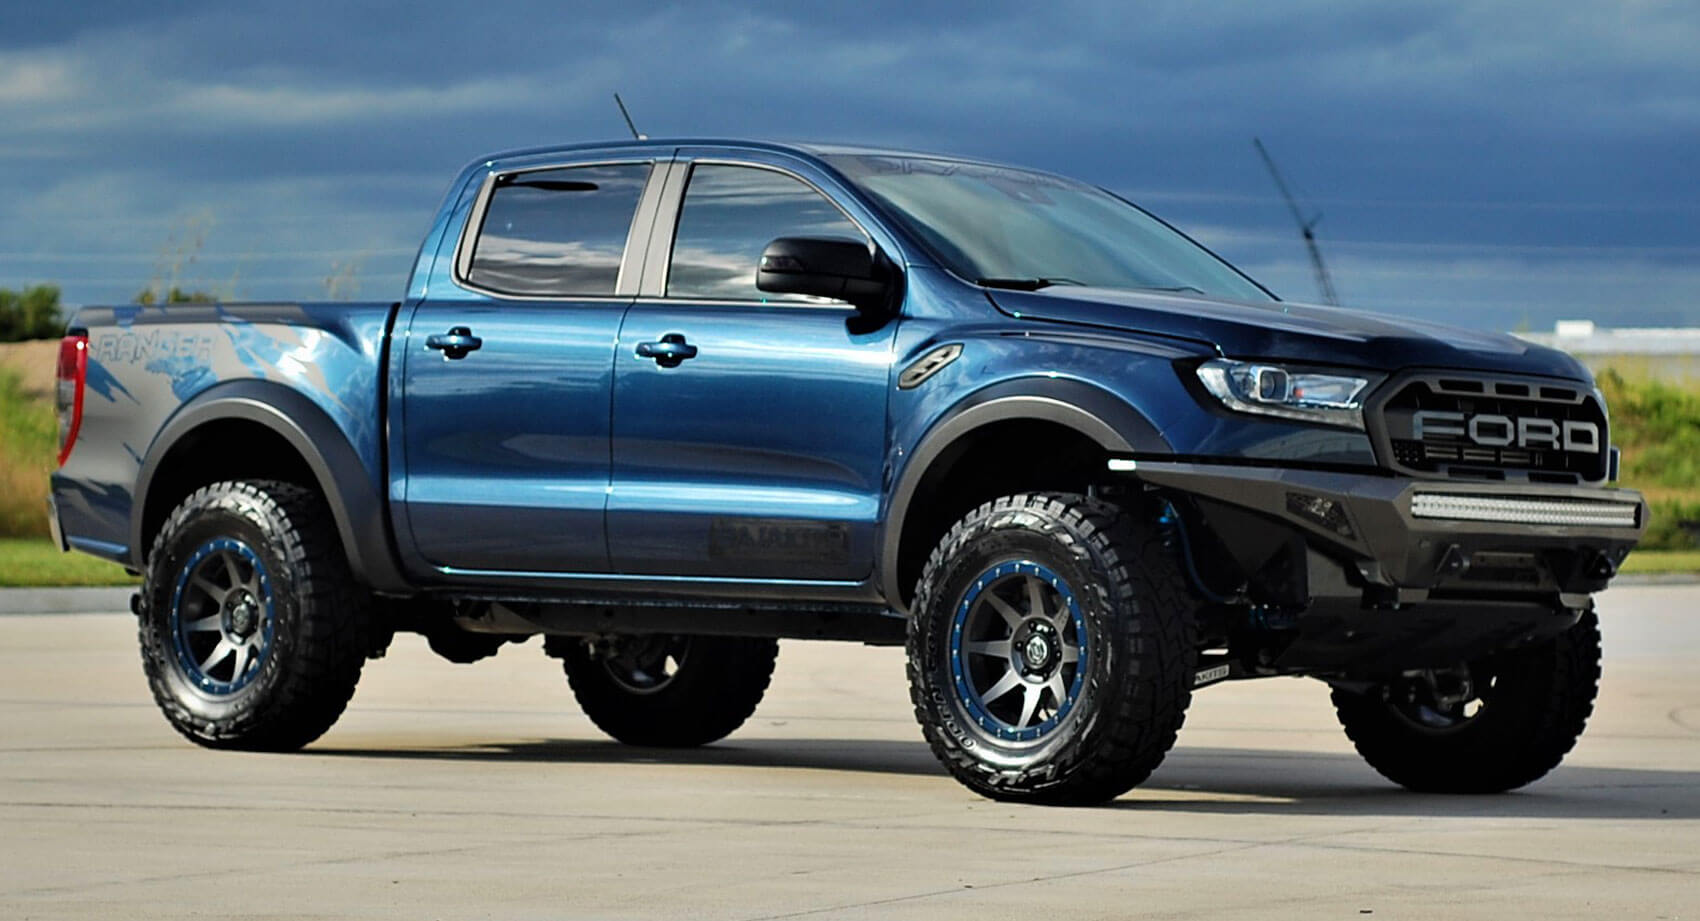 America, This Is Your (Unofficial) Ford Ranger Raptor!